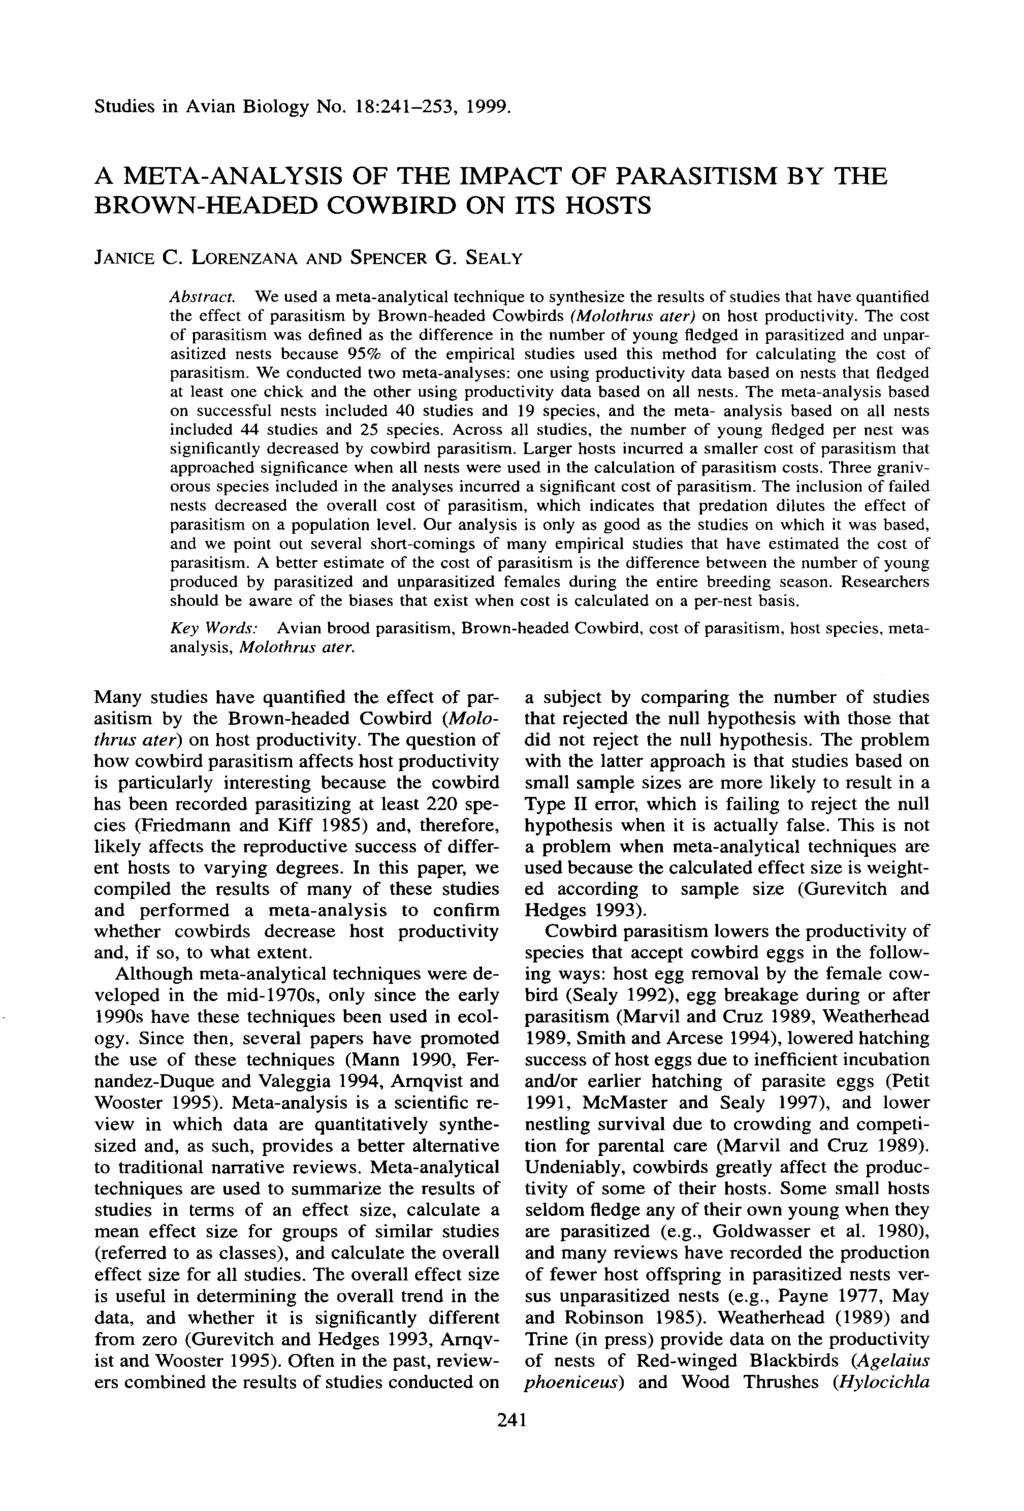 Studies in Avian Biology No. 18:241-253, 1999. A META-ANALYSIS OF THE IMPACT OF PARASITISM BY THE BROWN-HEADED COWBIRD ON ITS HOSTS JANICE C. LORENZANA AND SPENCER G. SEALY Abstract.